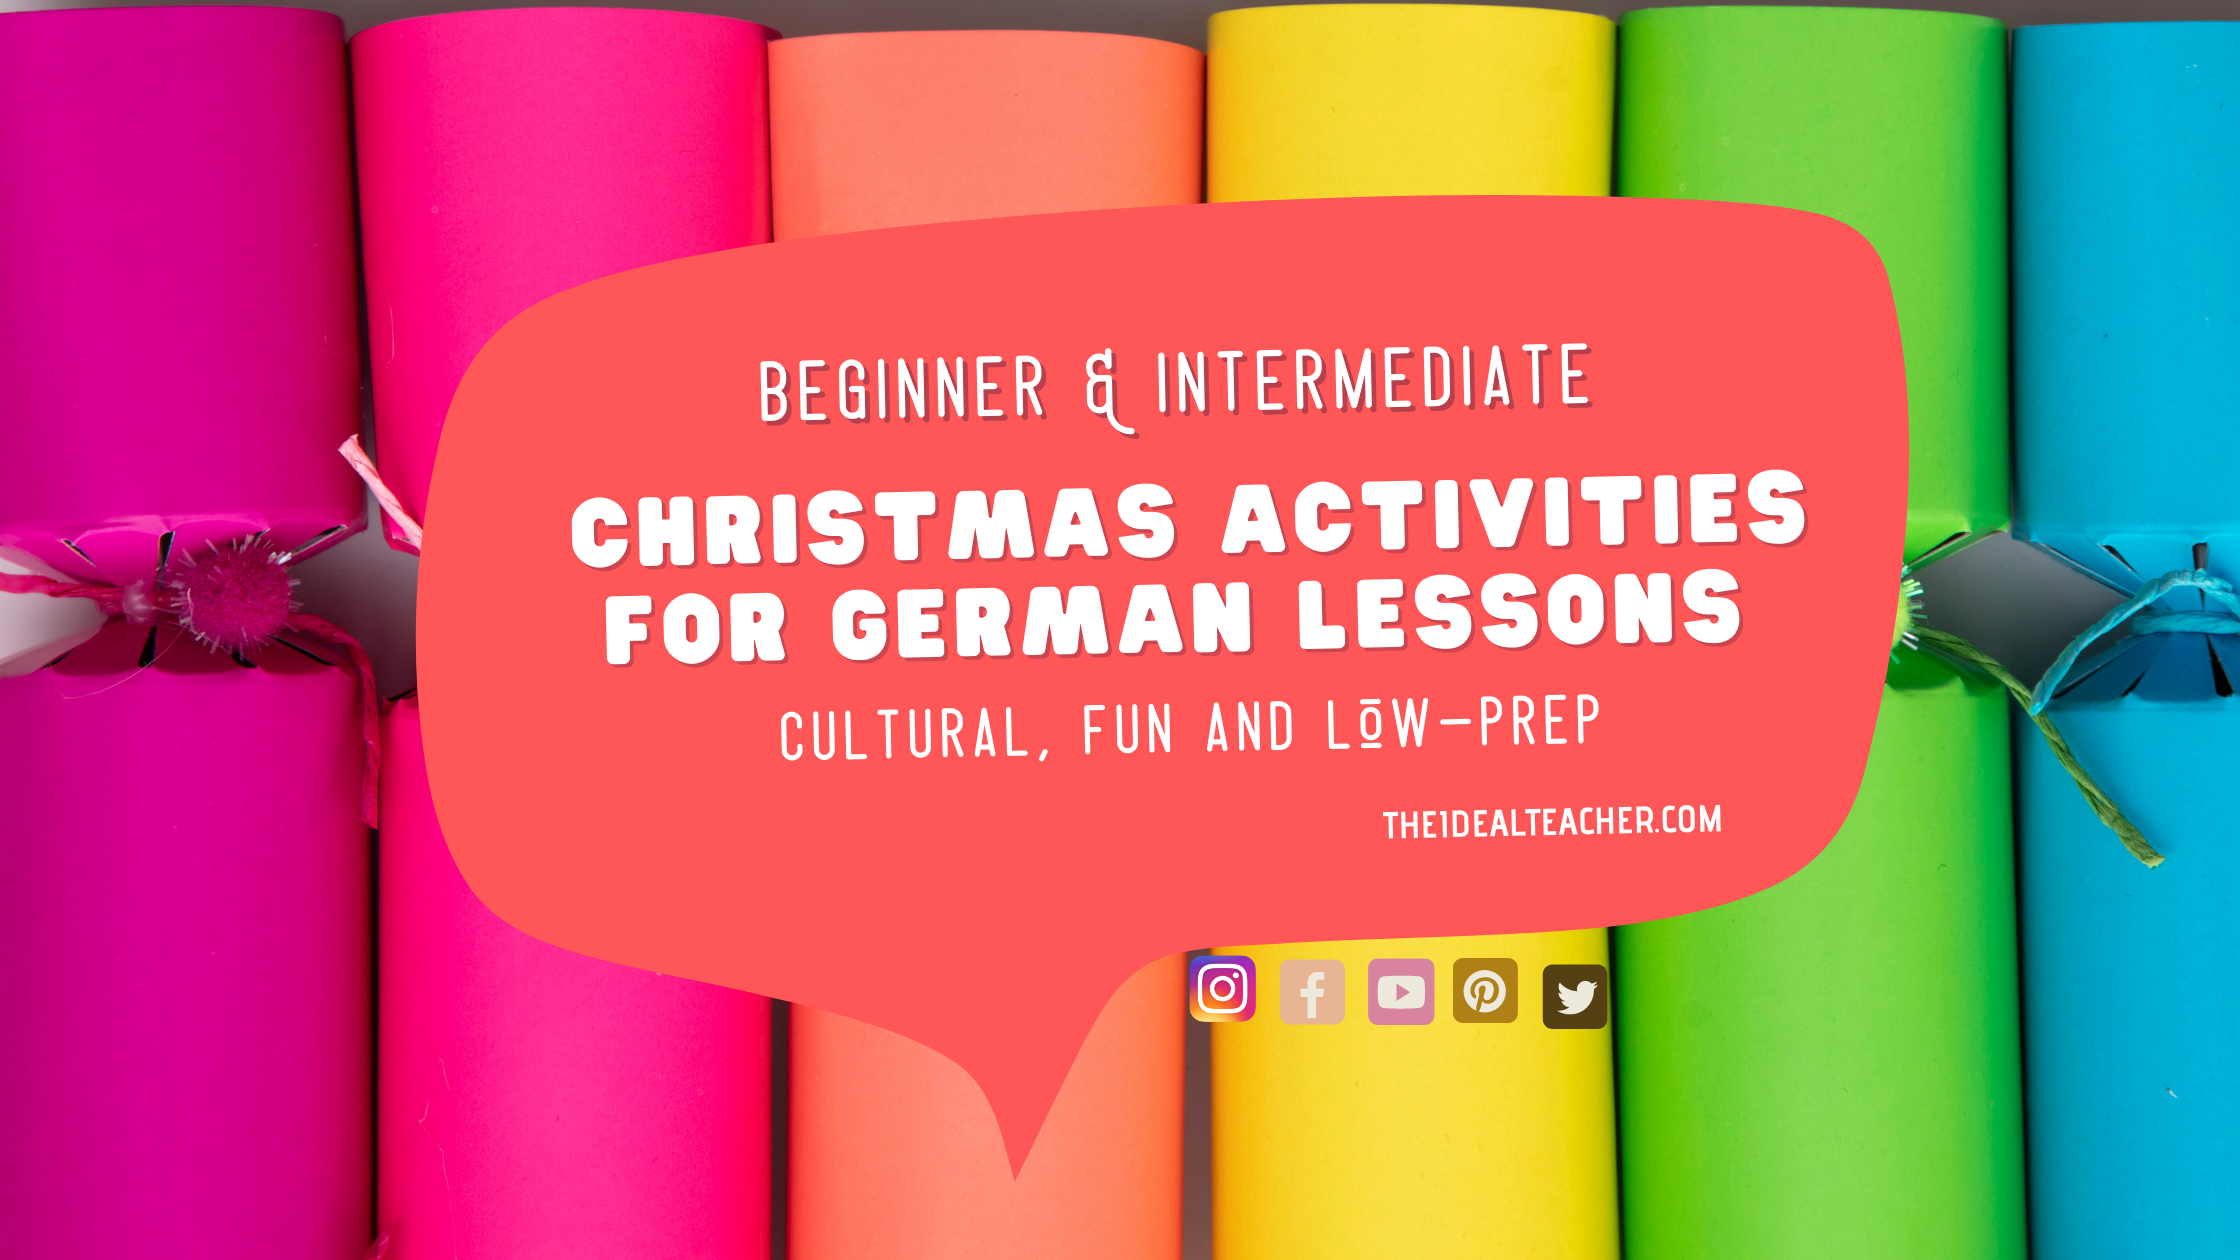 Amazing Christmas Activities For German Lessons – Fun & Cultural – All Levels